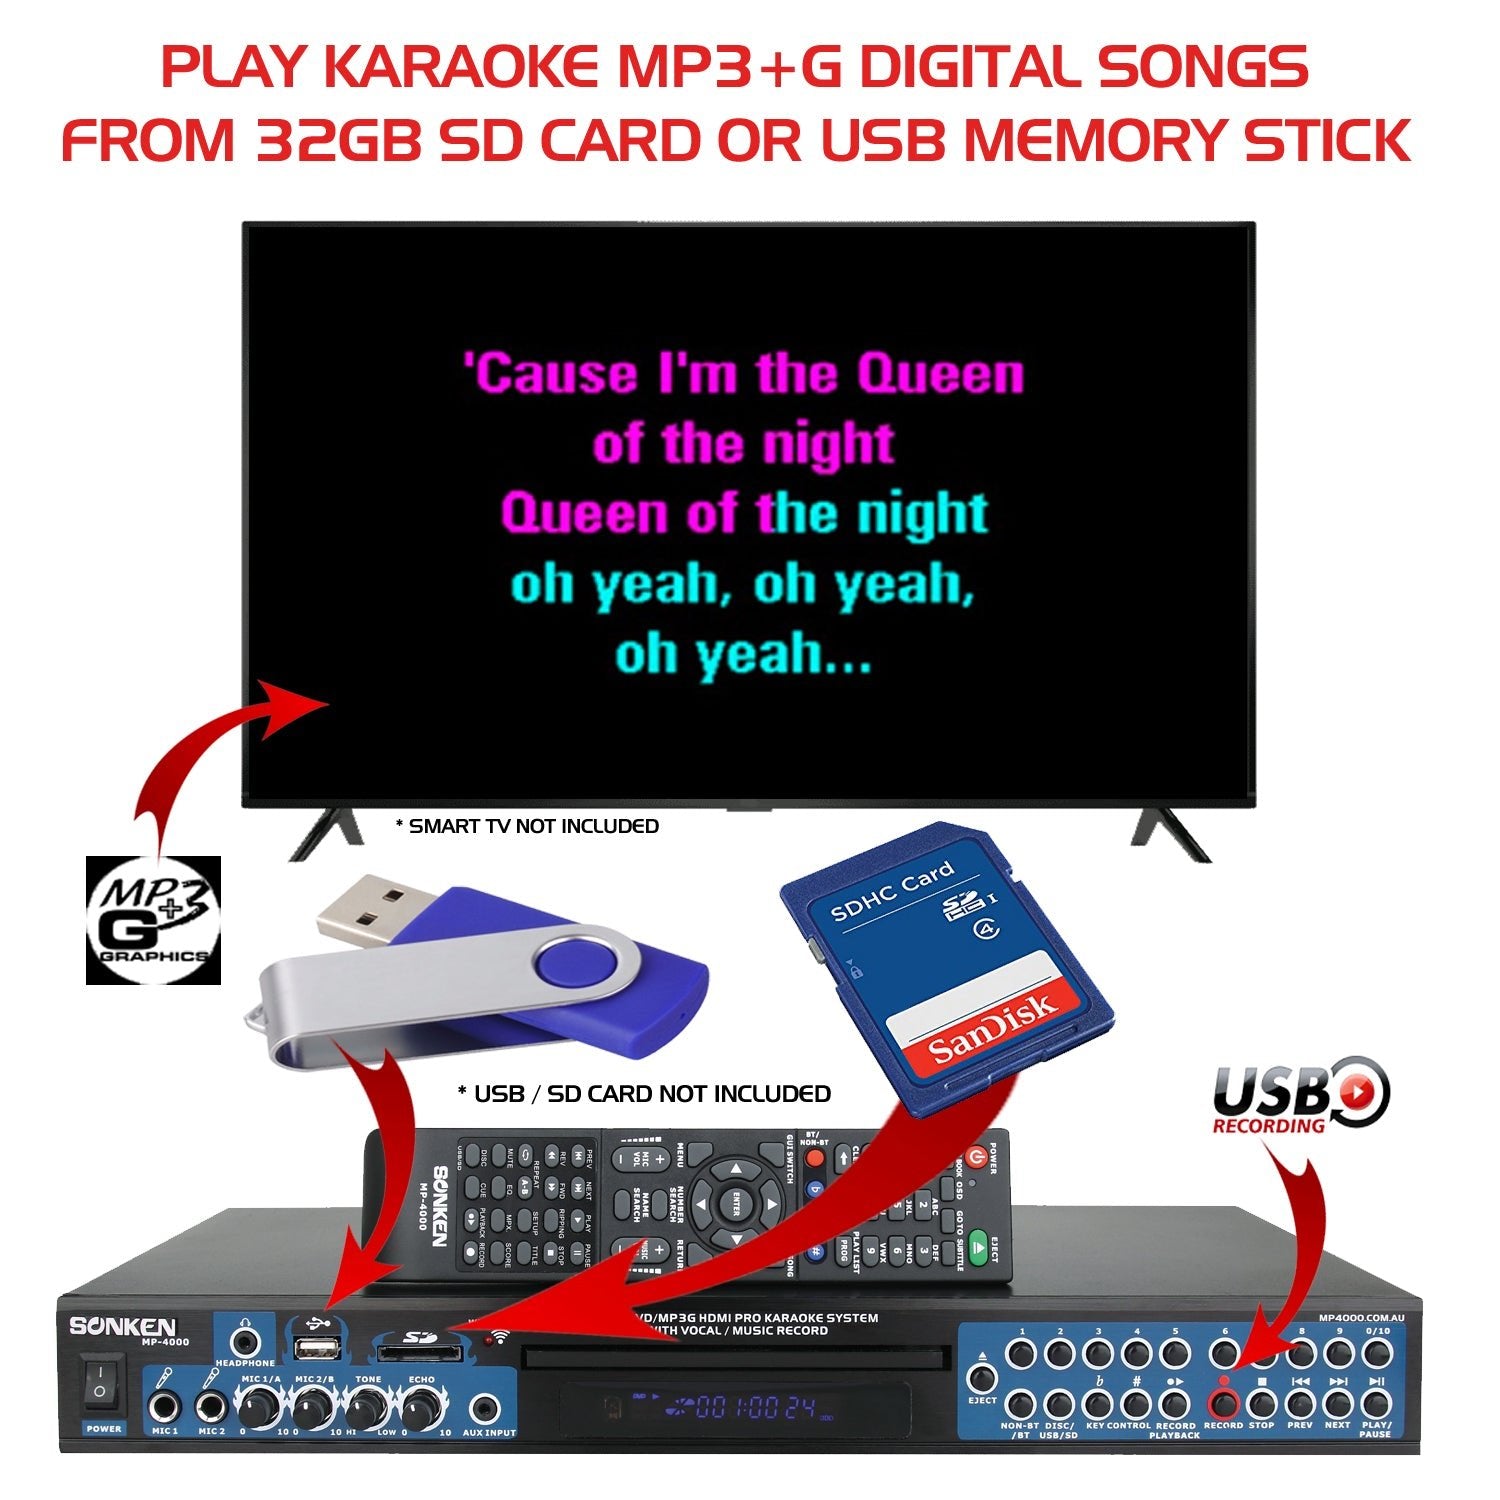 How To Connect Guide - Sonken MP4000 Creating A MP3+G Song Book - Karaoke Home Entertainment